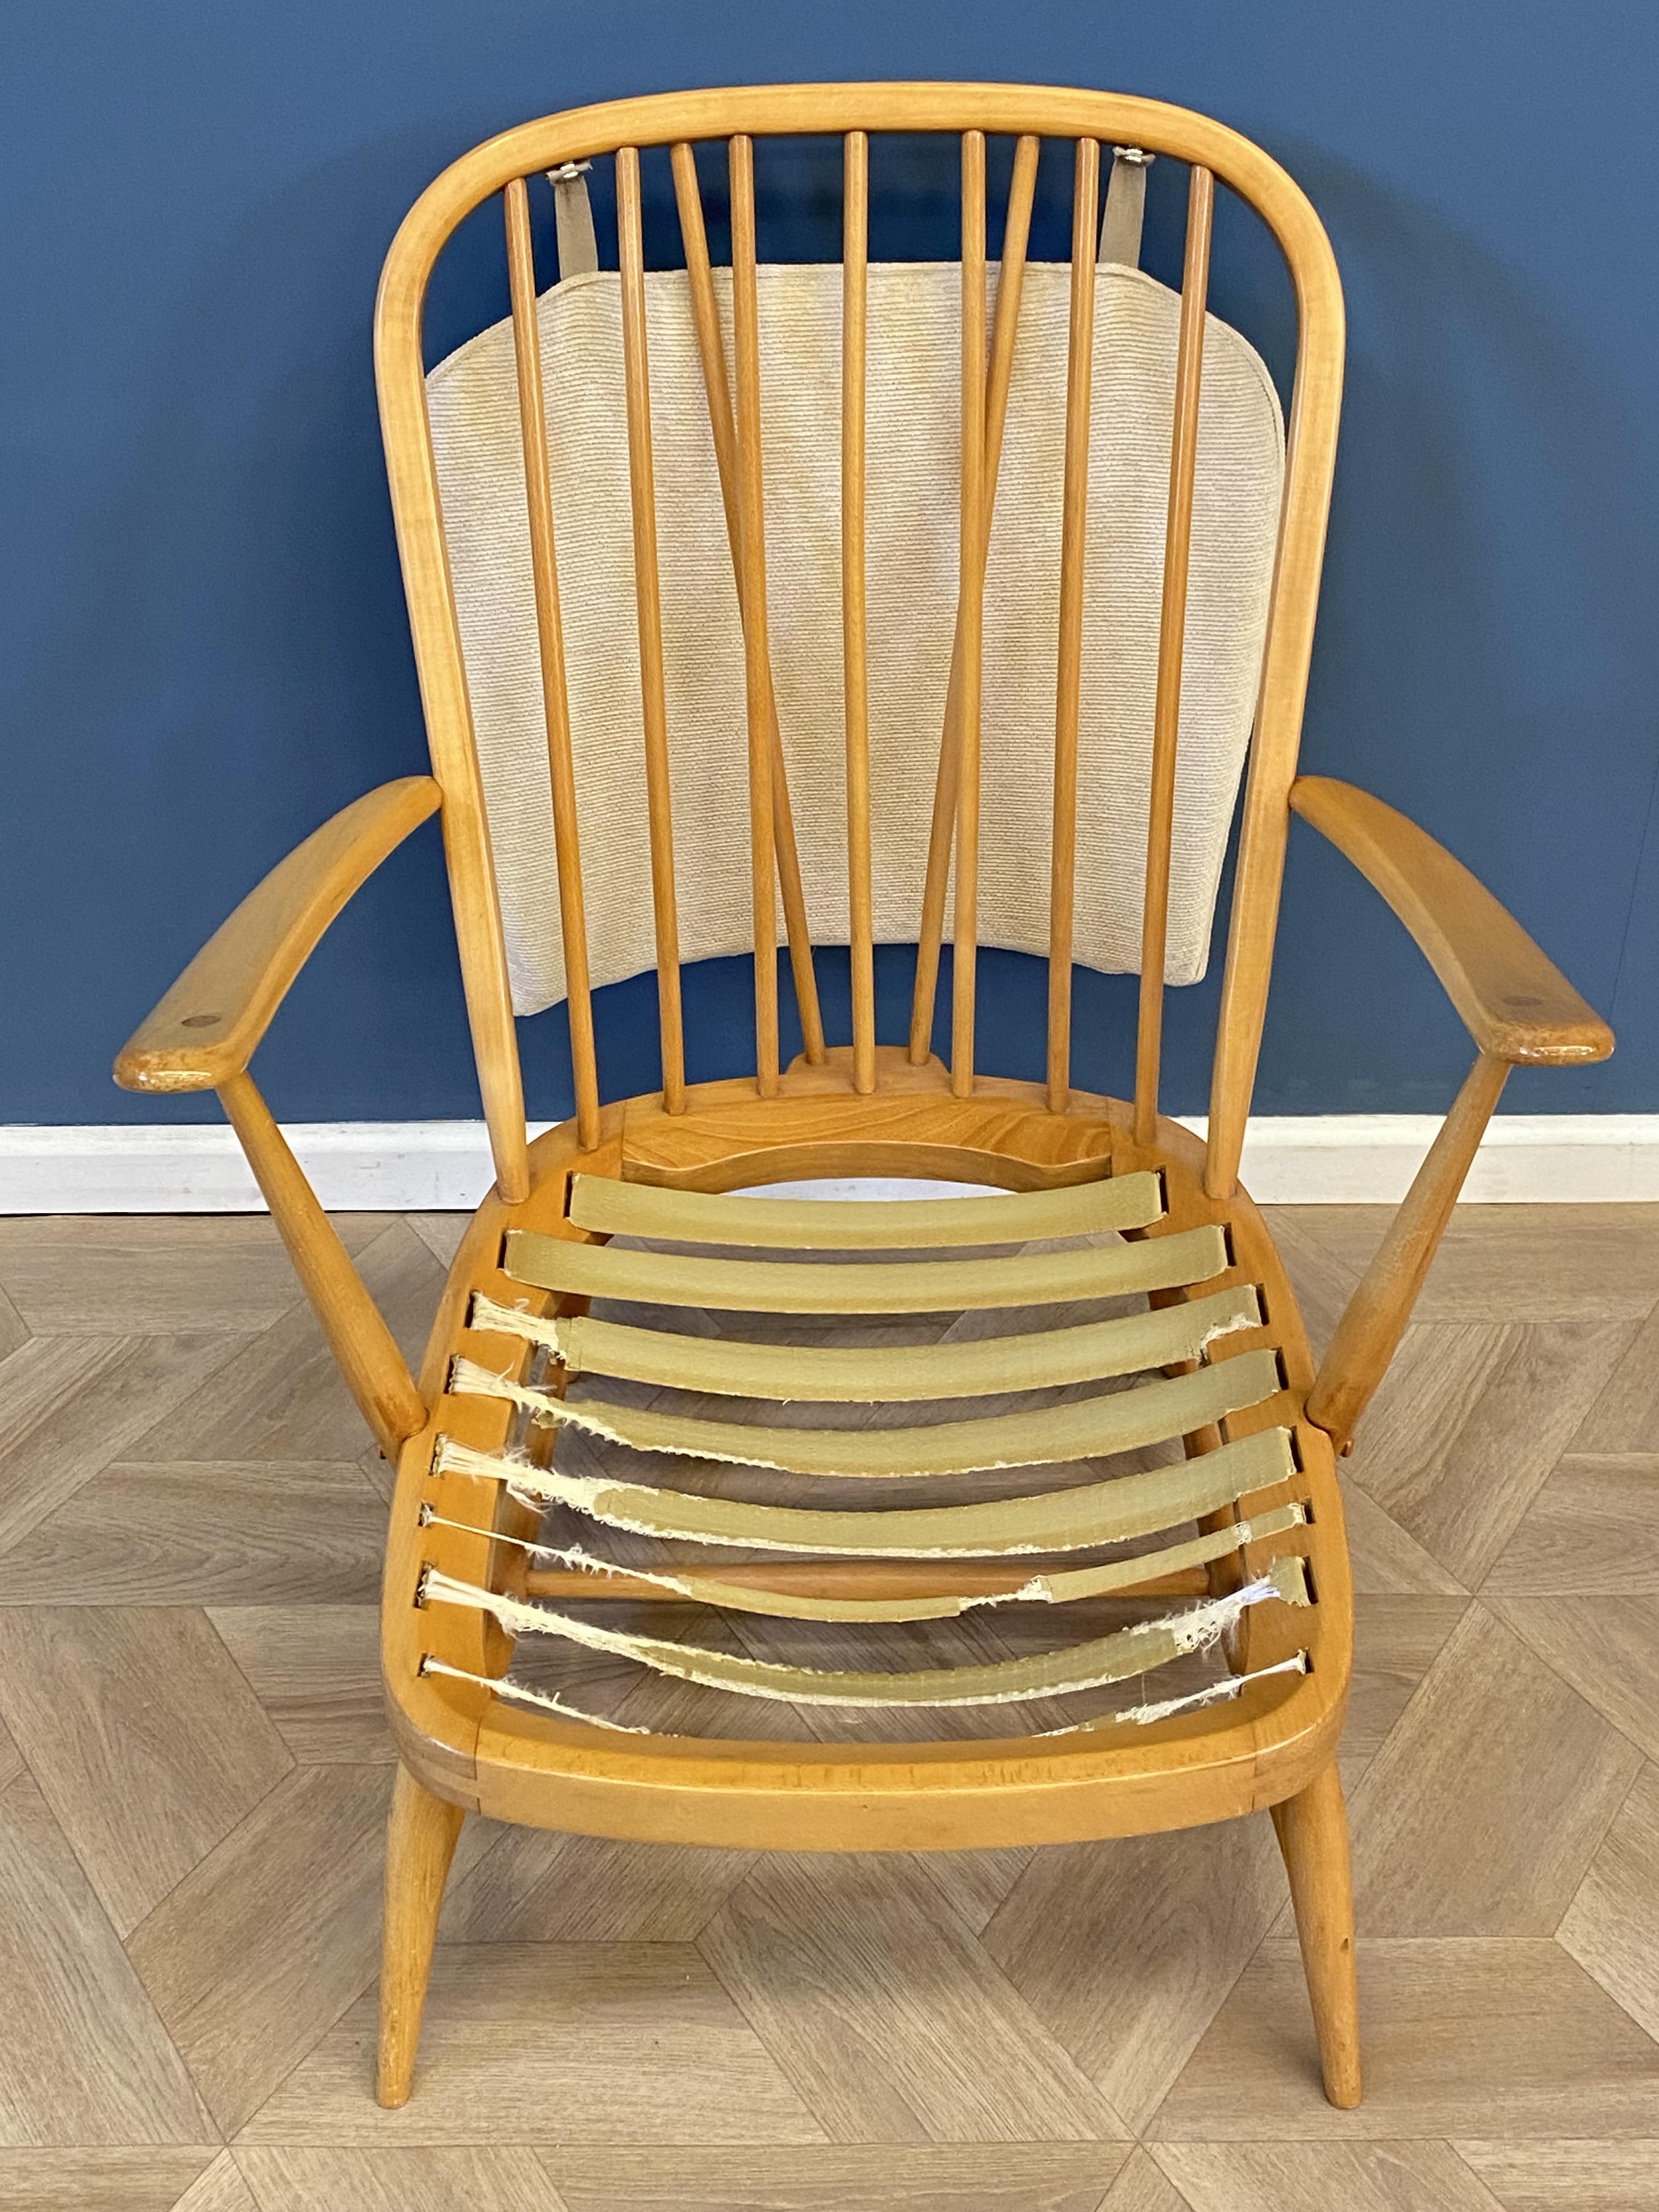 Ercol style open armchair - Image 5 of 7